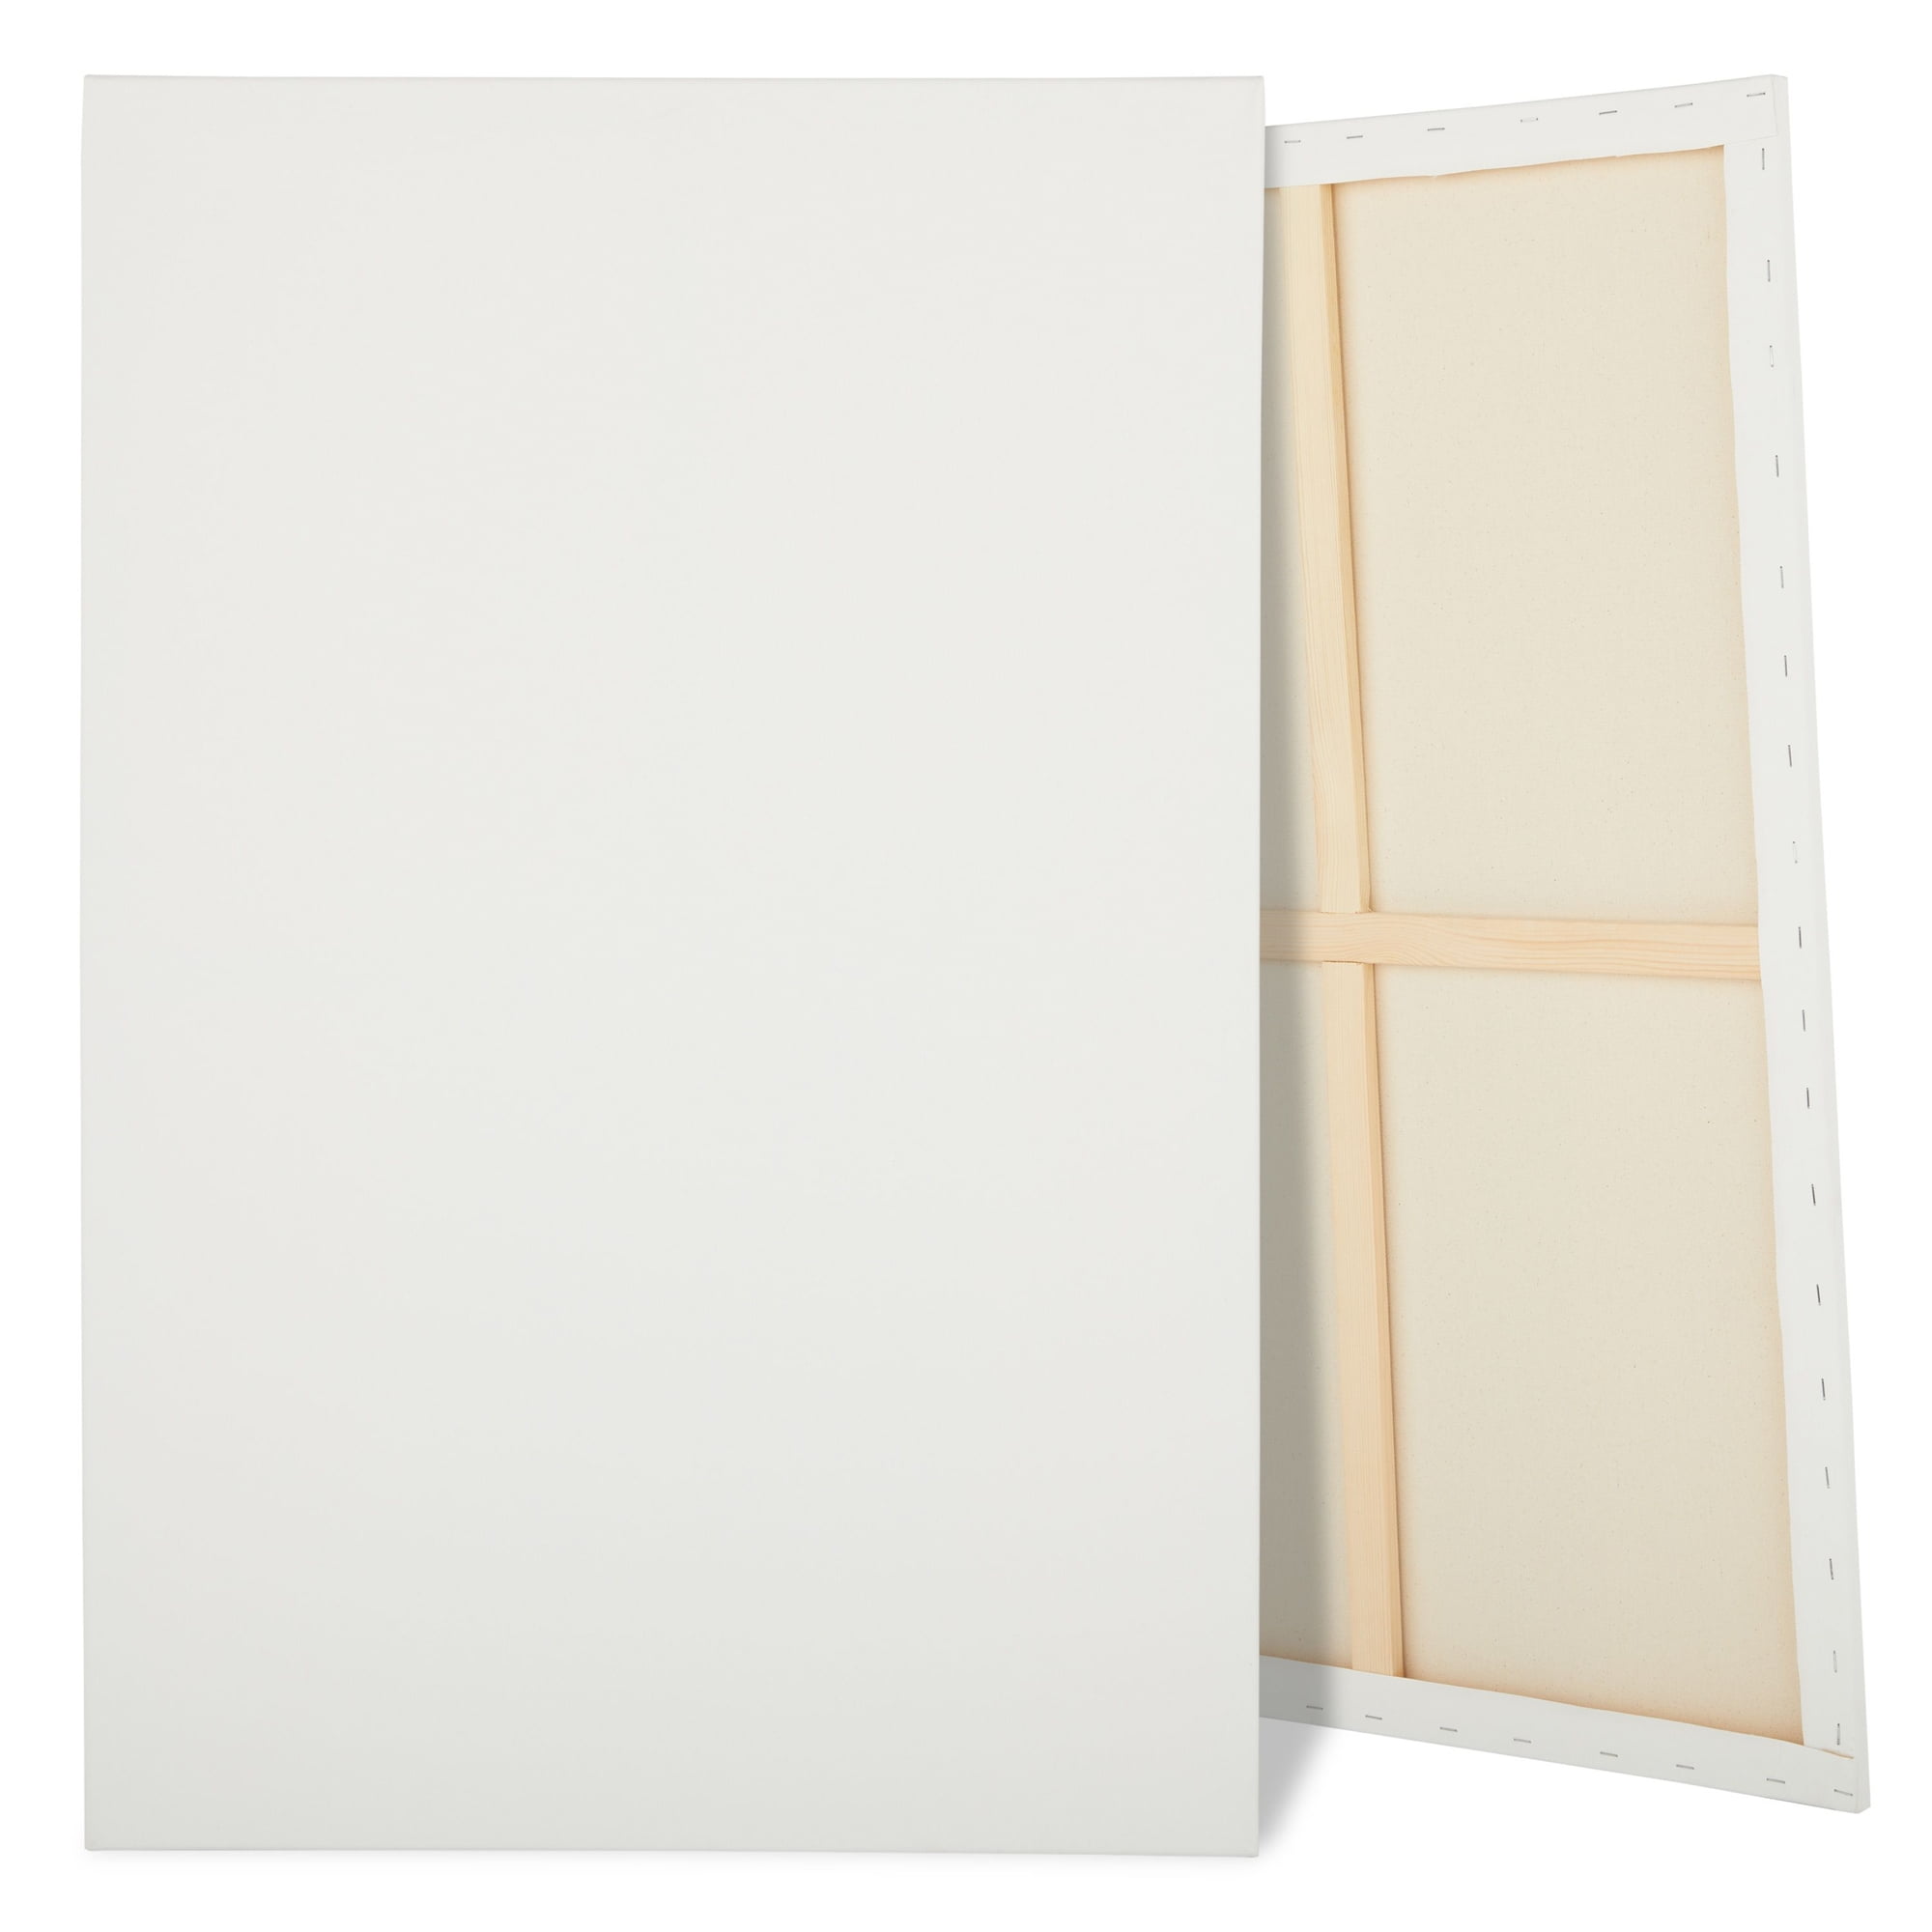 Shuttle Art Painting Canvas Panel, 36 Multi Pack, 5x7, 8x10, 9x12, 11x14  inch (9 PCS of Each), 100% Cotton Art Canvas Board Primed White, Blank  Canvas